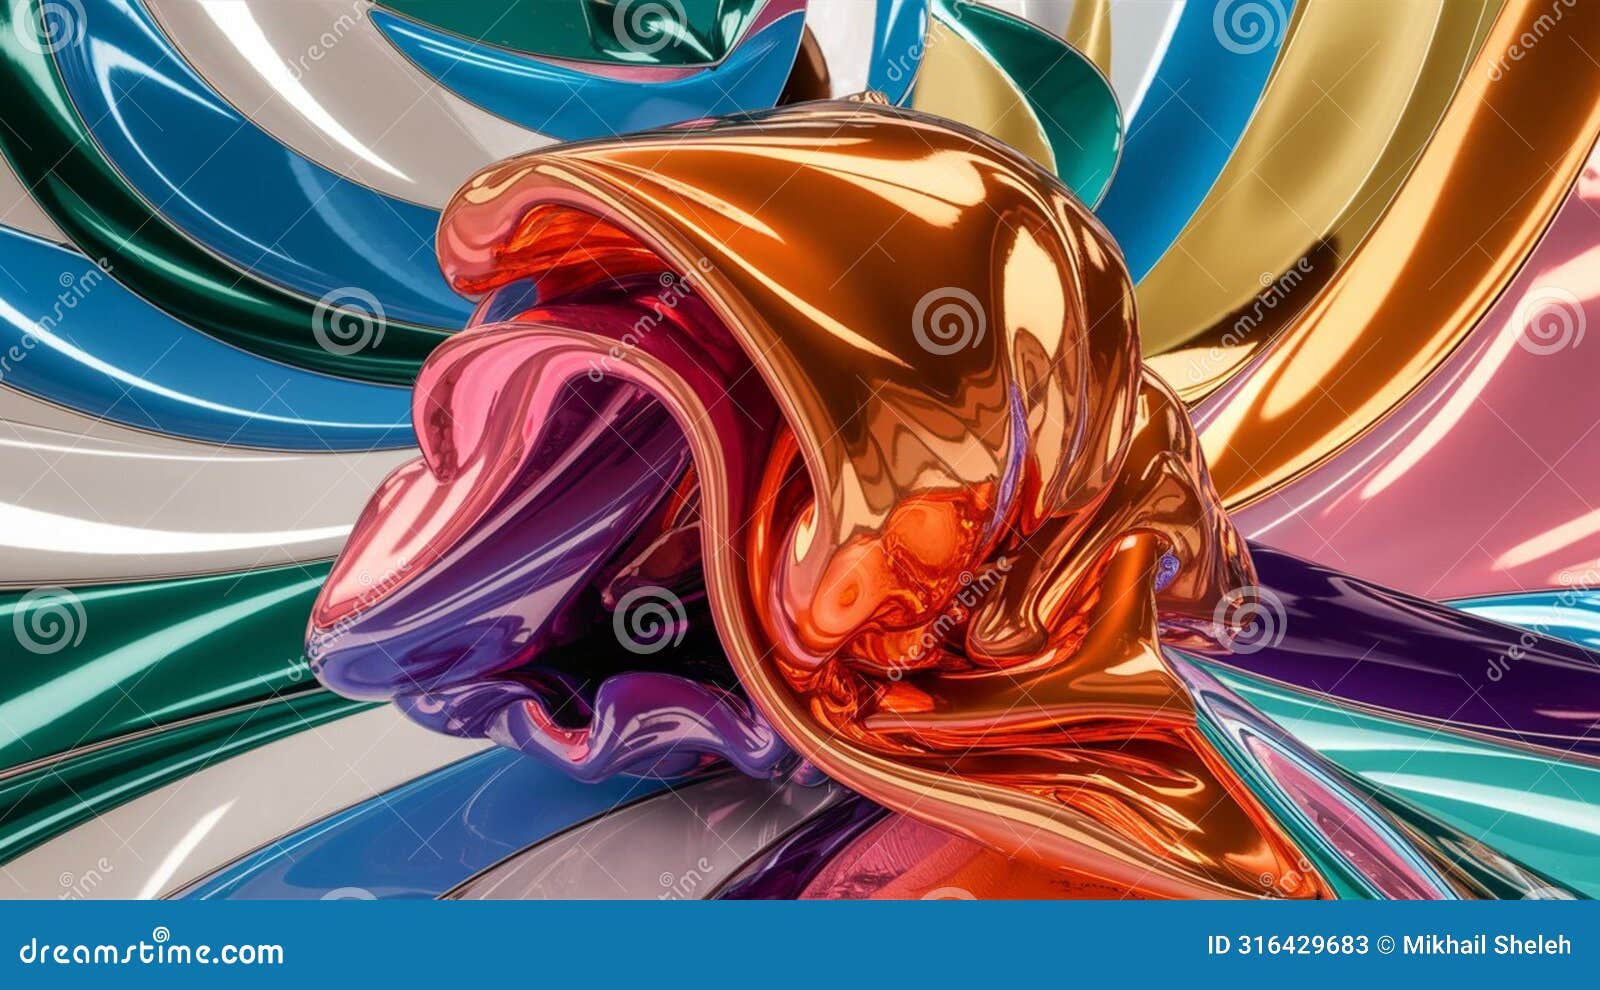 abstract multicolored background drawn with fused plastic